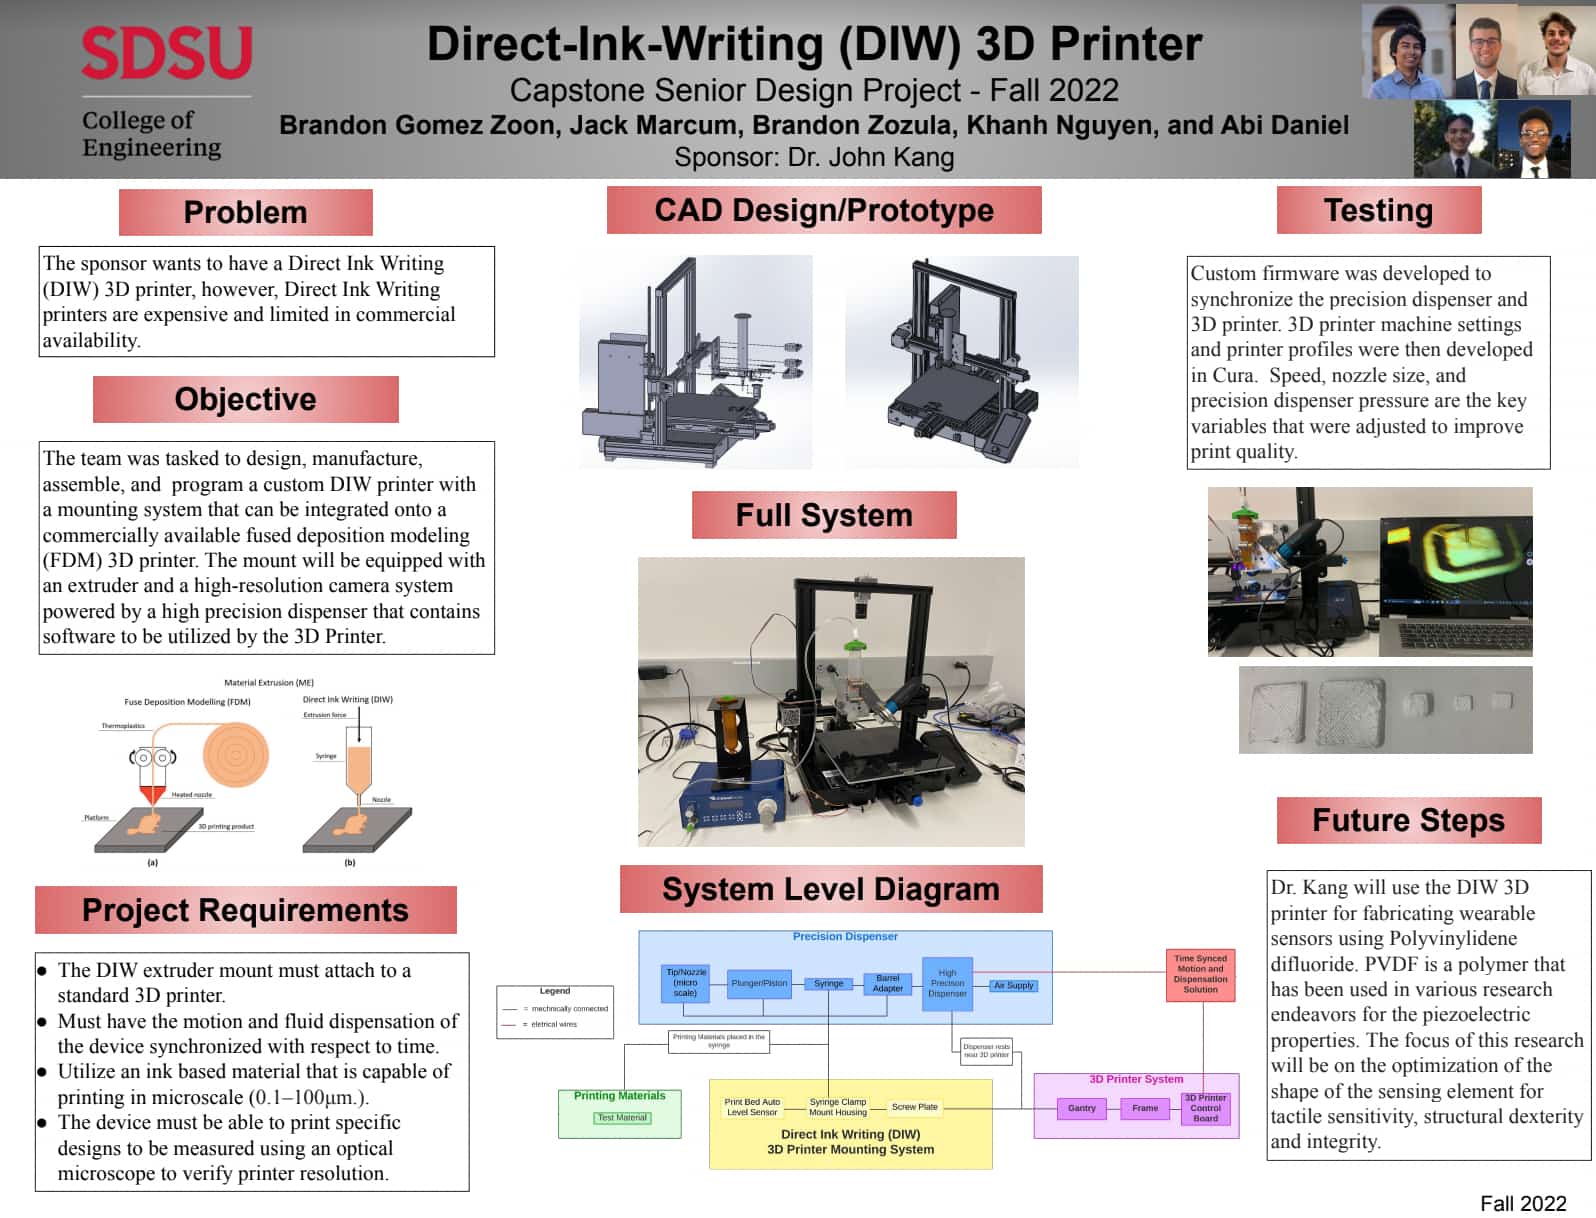 Direct-Ink-Writing (DIW) 3D Printer Science Poster